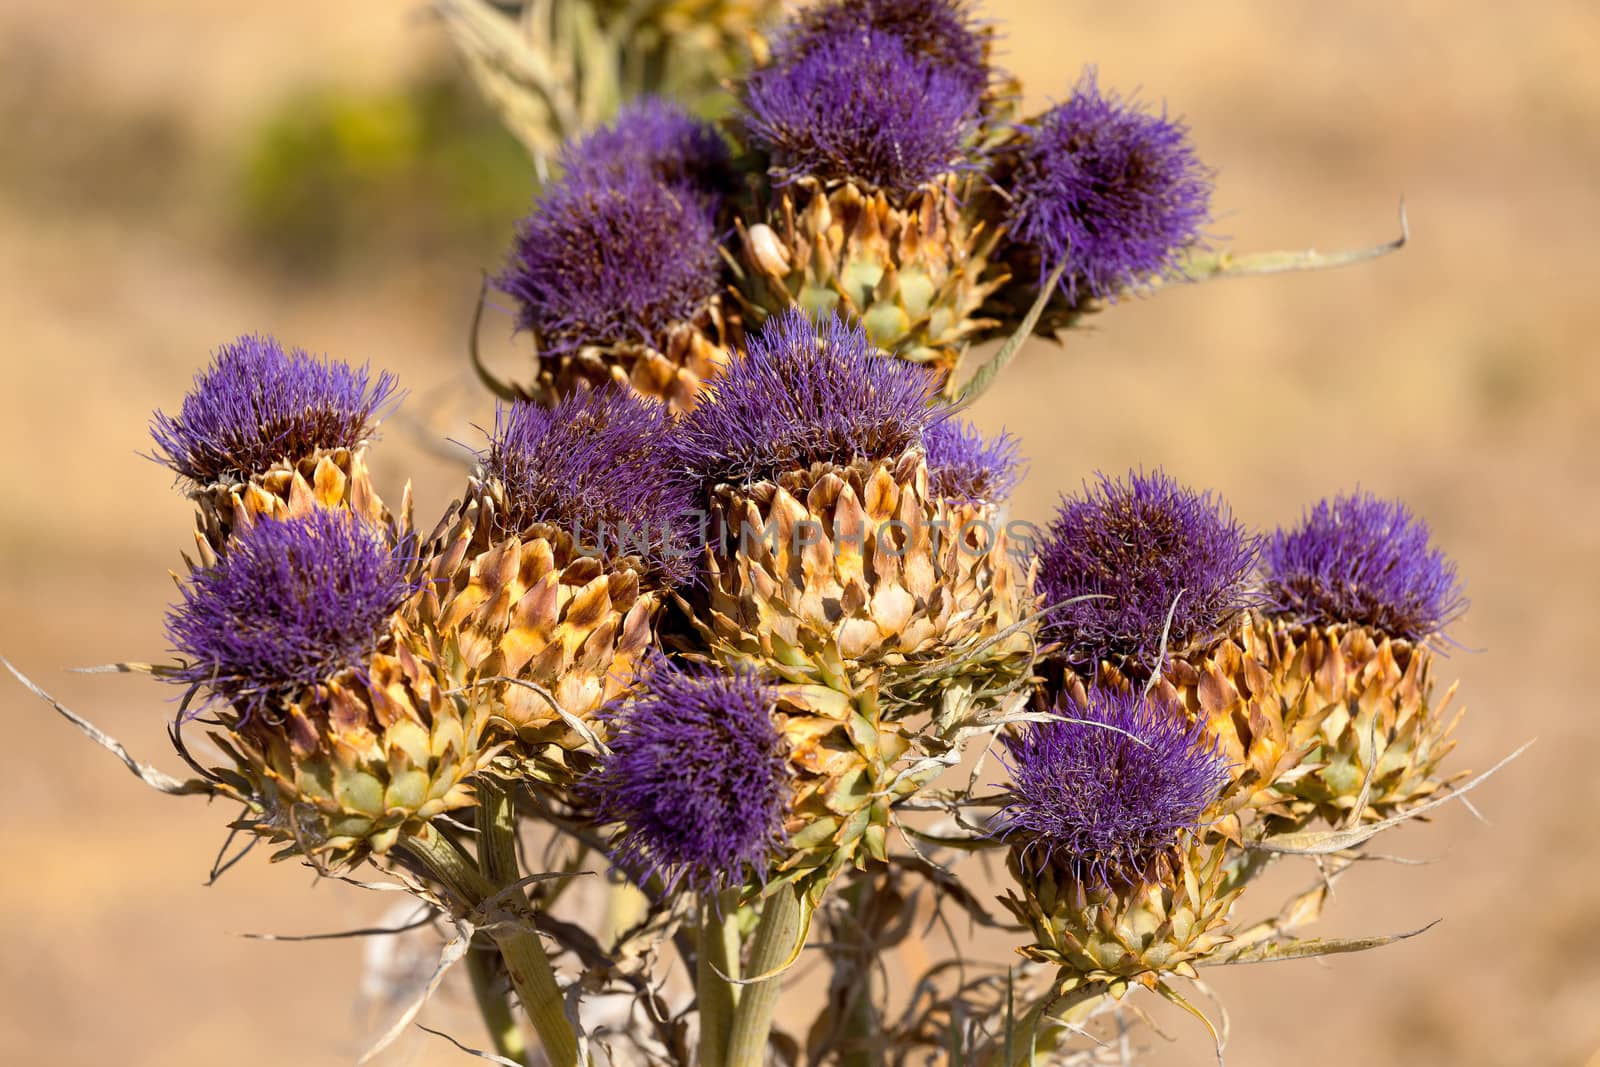 Vibrant milk thistle flowers by Discovod